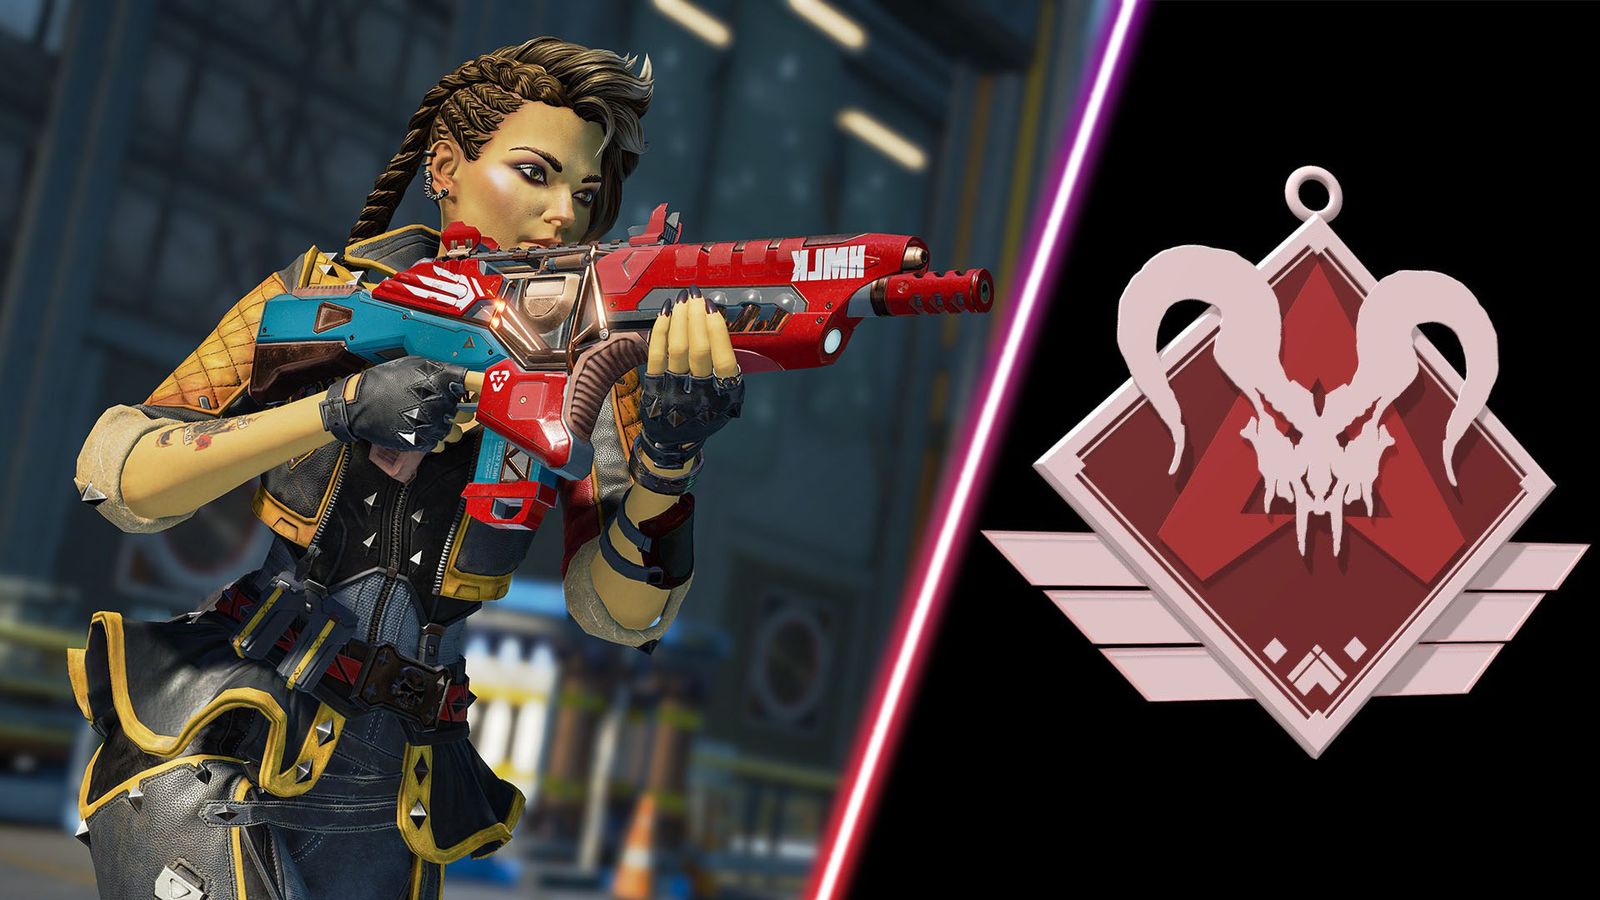 Apex Legends player aiming with gun and Apex Legends Predator badge on black background